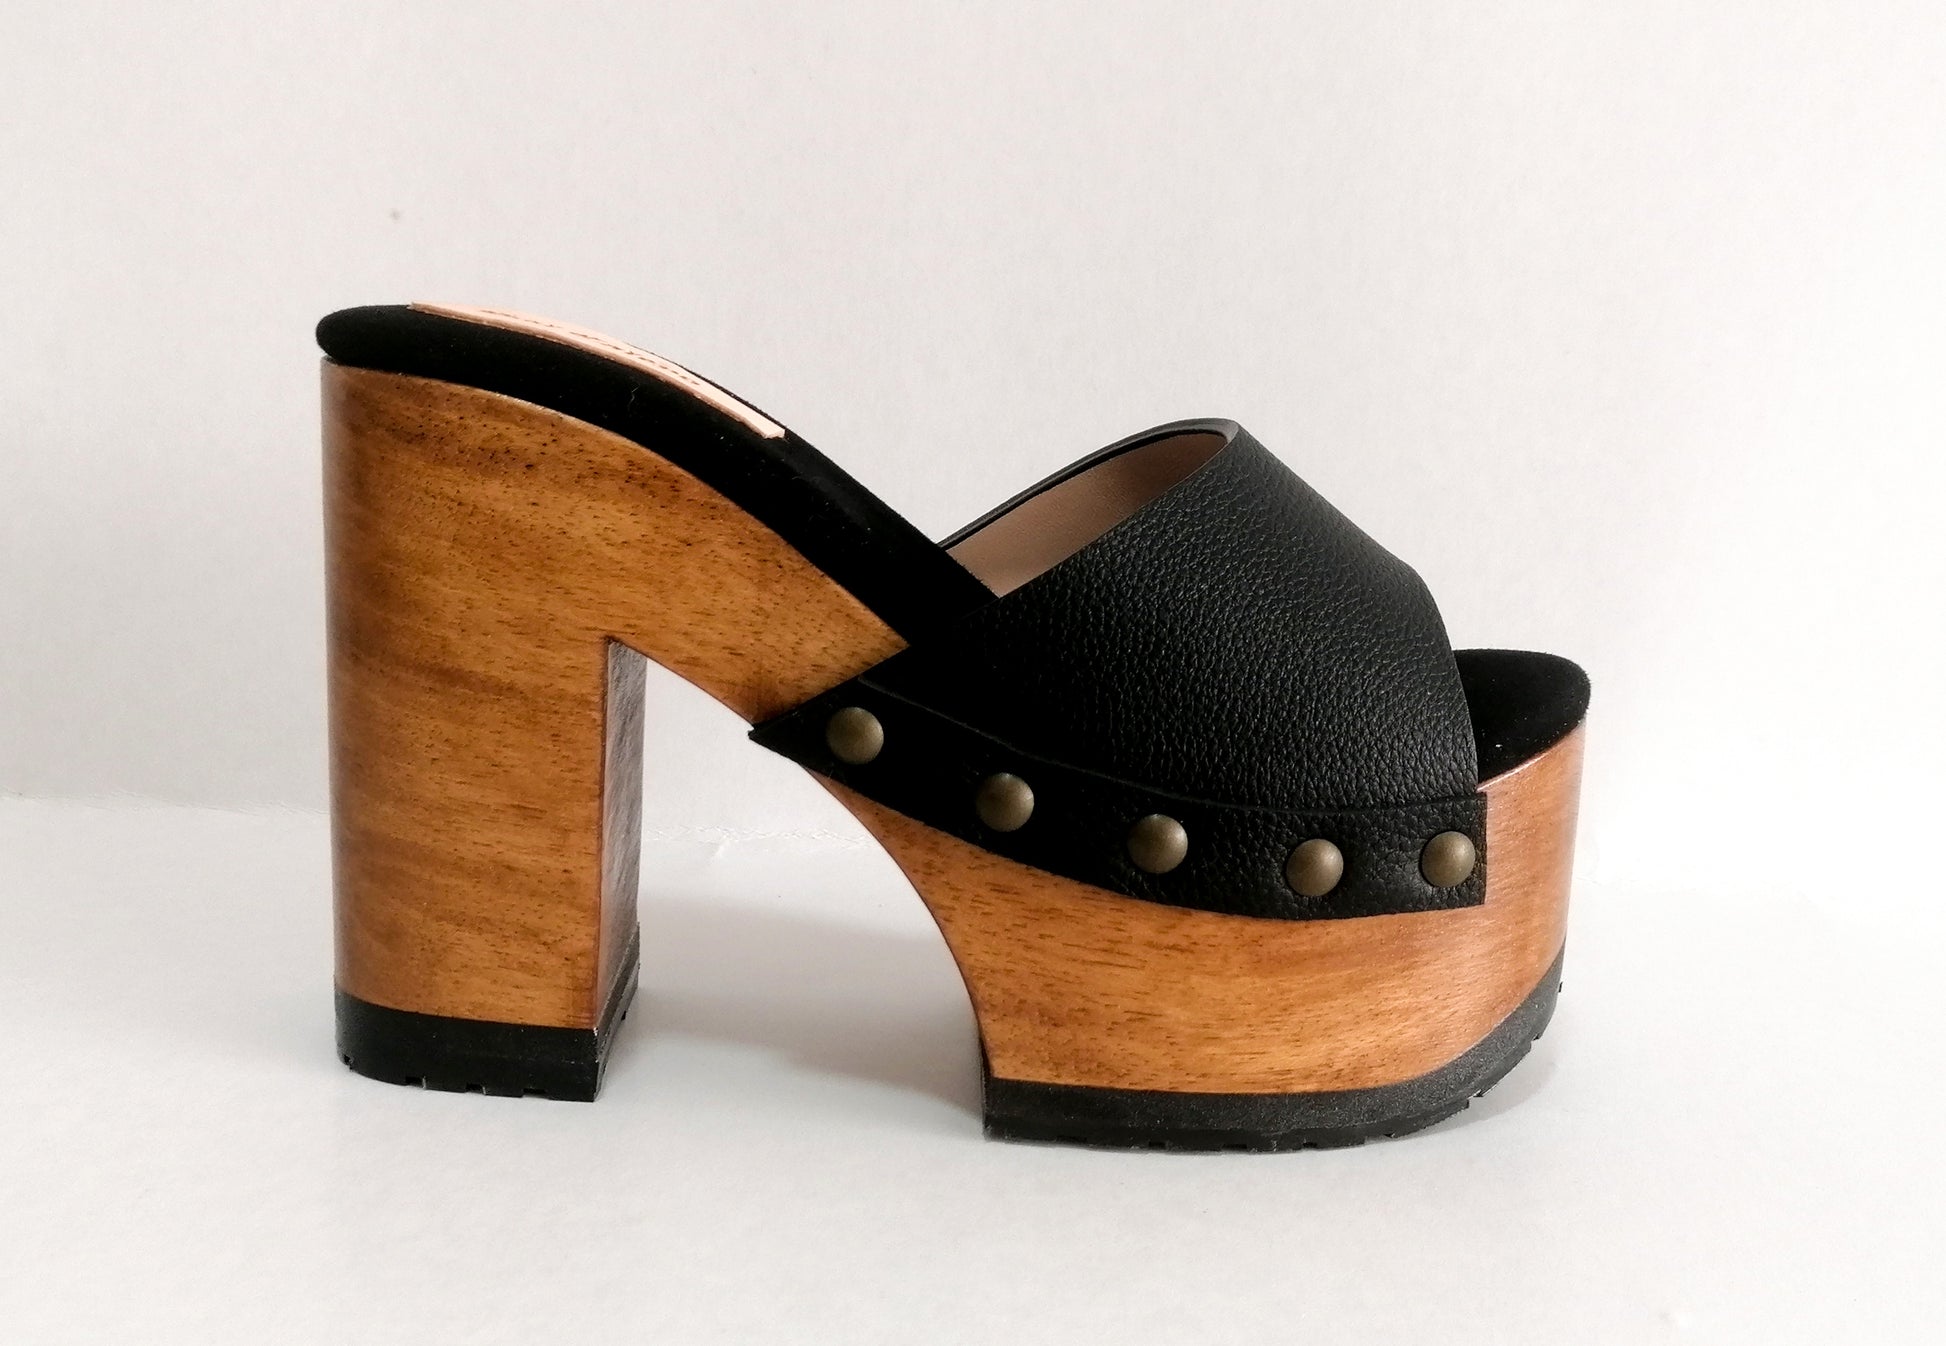 Black leather peep toe sandal. Platform sandal with super high wooden heel. Clog sandal 70's style. Sizes 34 to 47. High quality handmade leather shoes by sol Caleyo. Sustainable fashion.